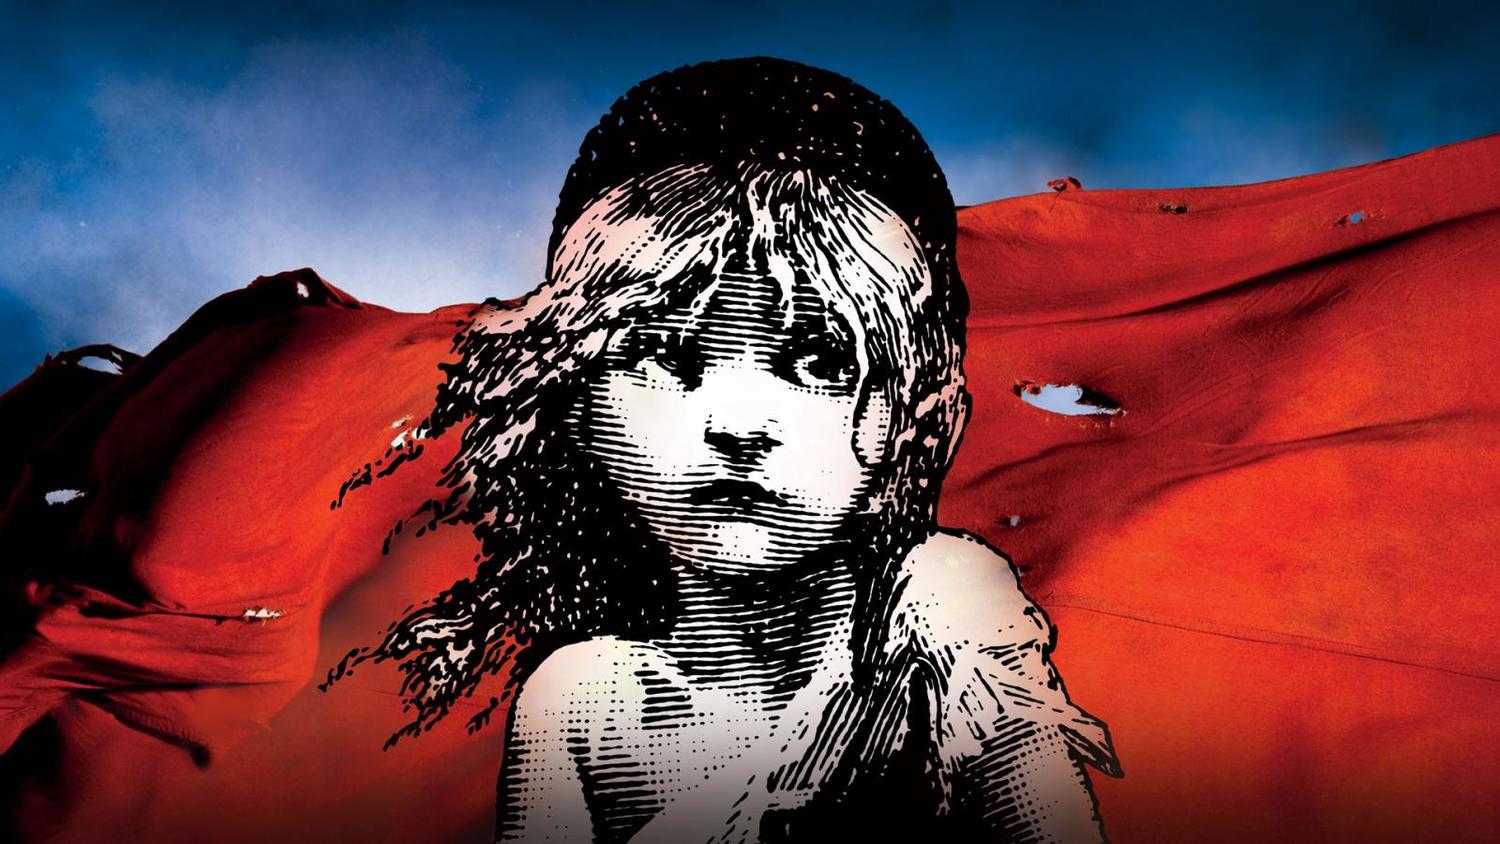 LES MISERABLES Coming to Walton Arts Center This June! 